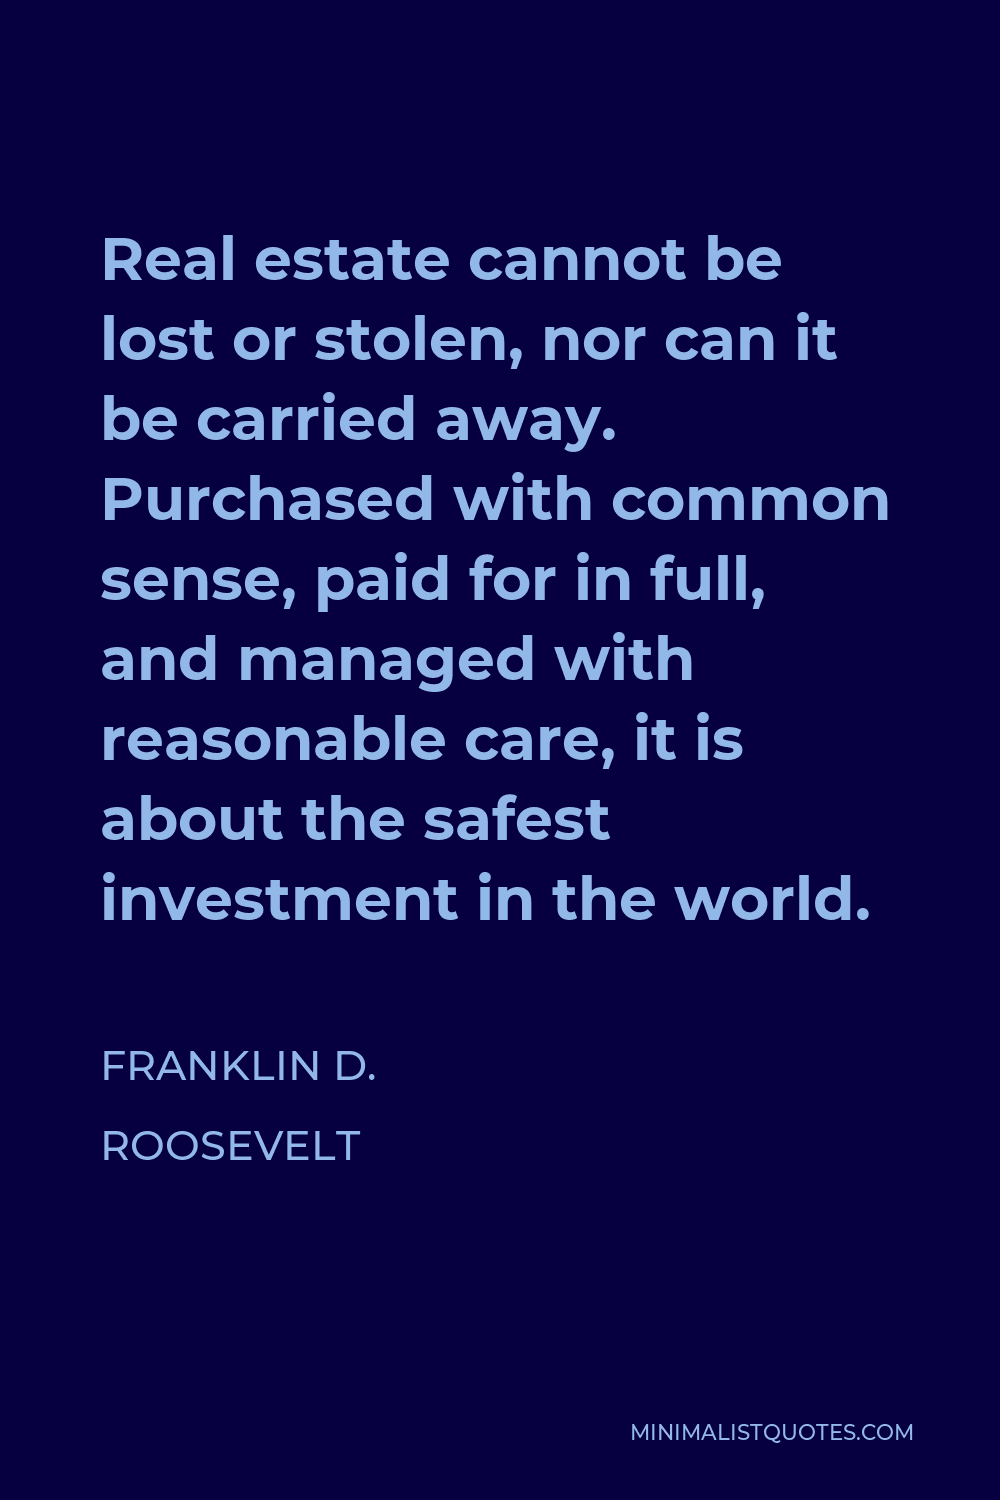 Franklin D. Roosevelt Quote - Real estate cannot be lost or stolen, nor can it be carried away. Purchased with common sense, paid for in full, and managed with reasonable care, it is about the safest investment in the world.